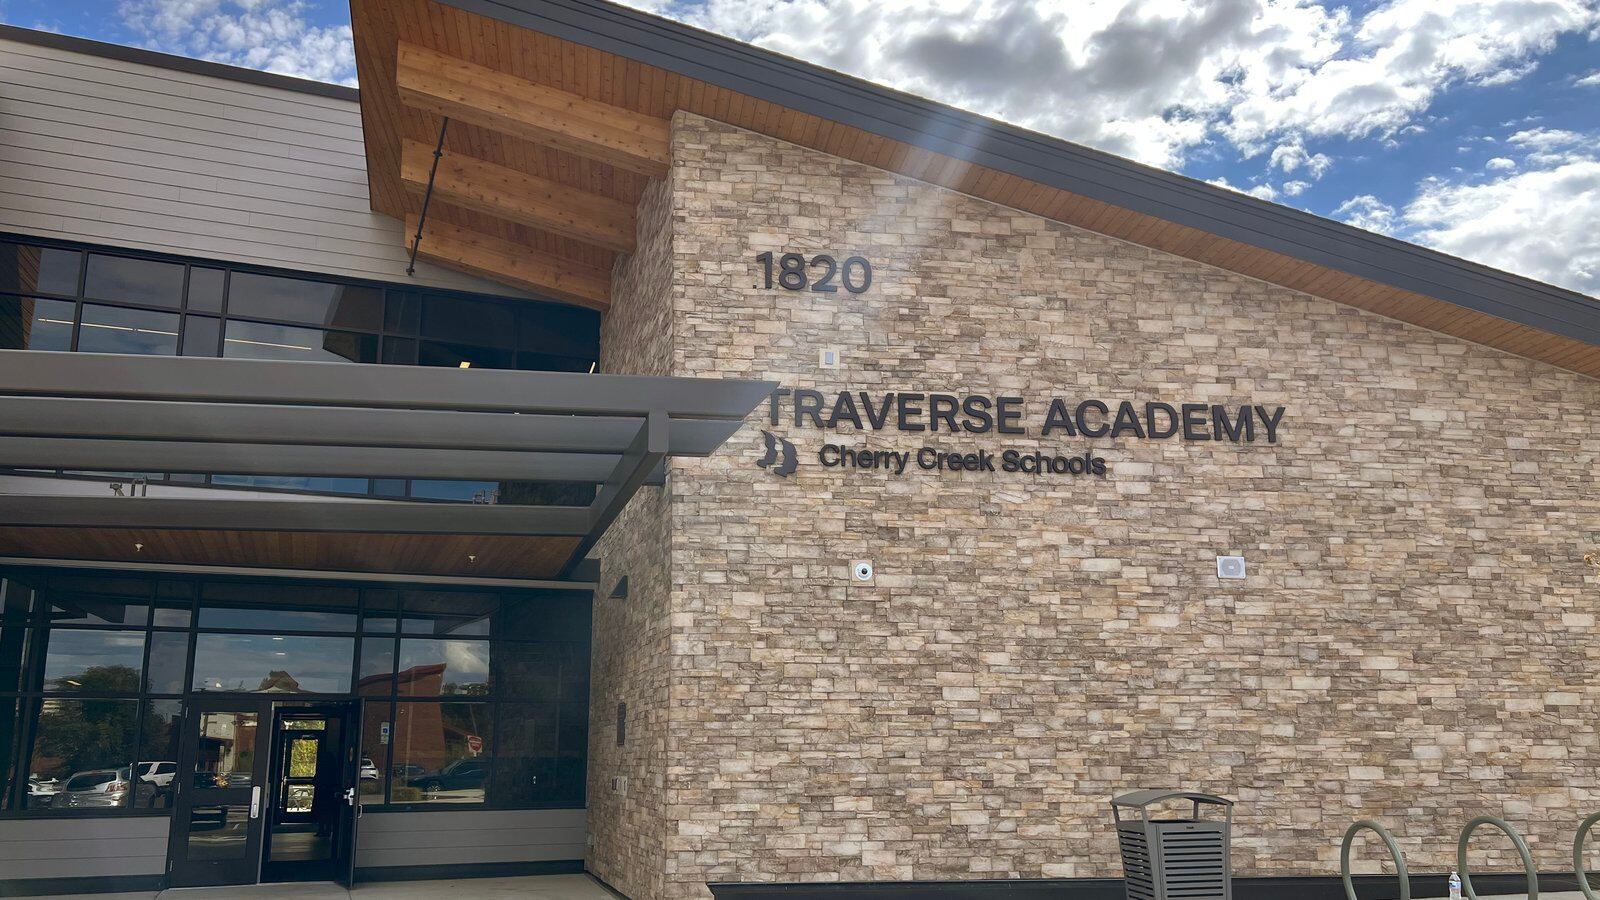 The exterior and entrance to a building with a brown brick face, marked “Traverse Academy”